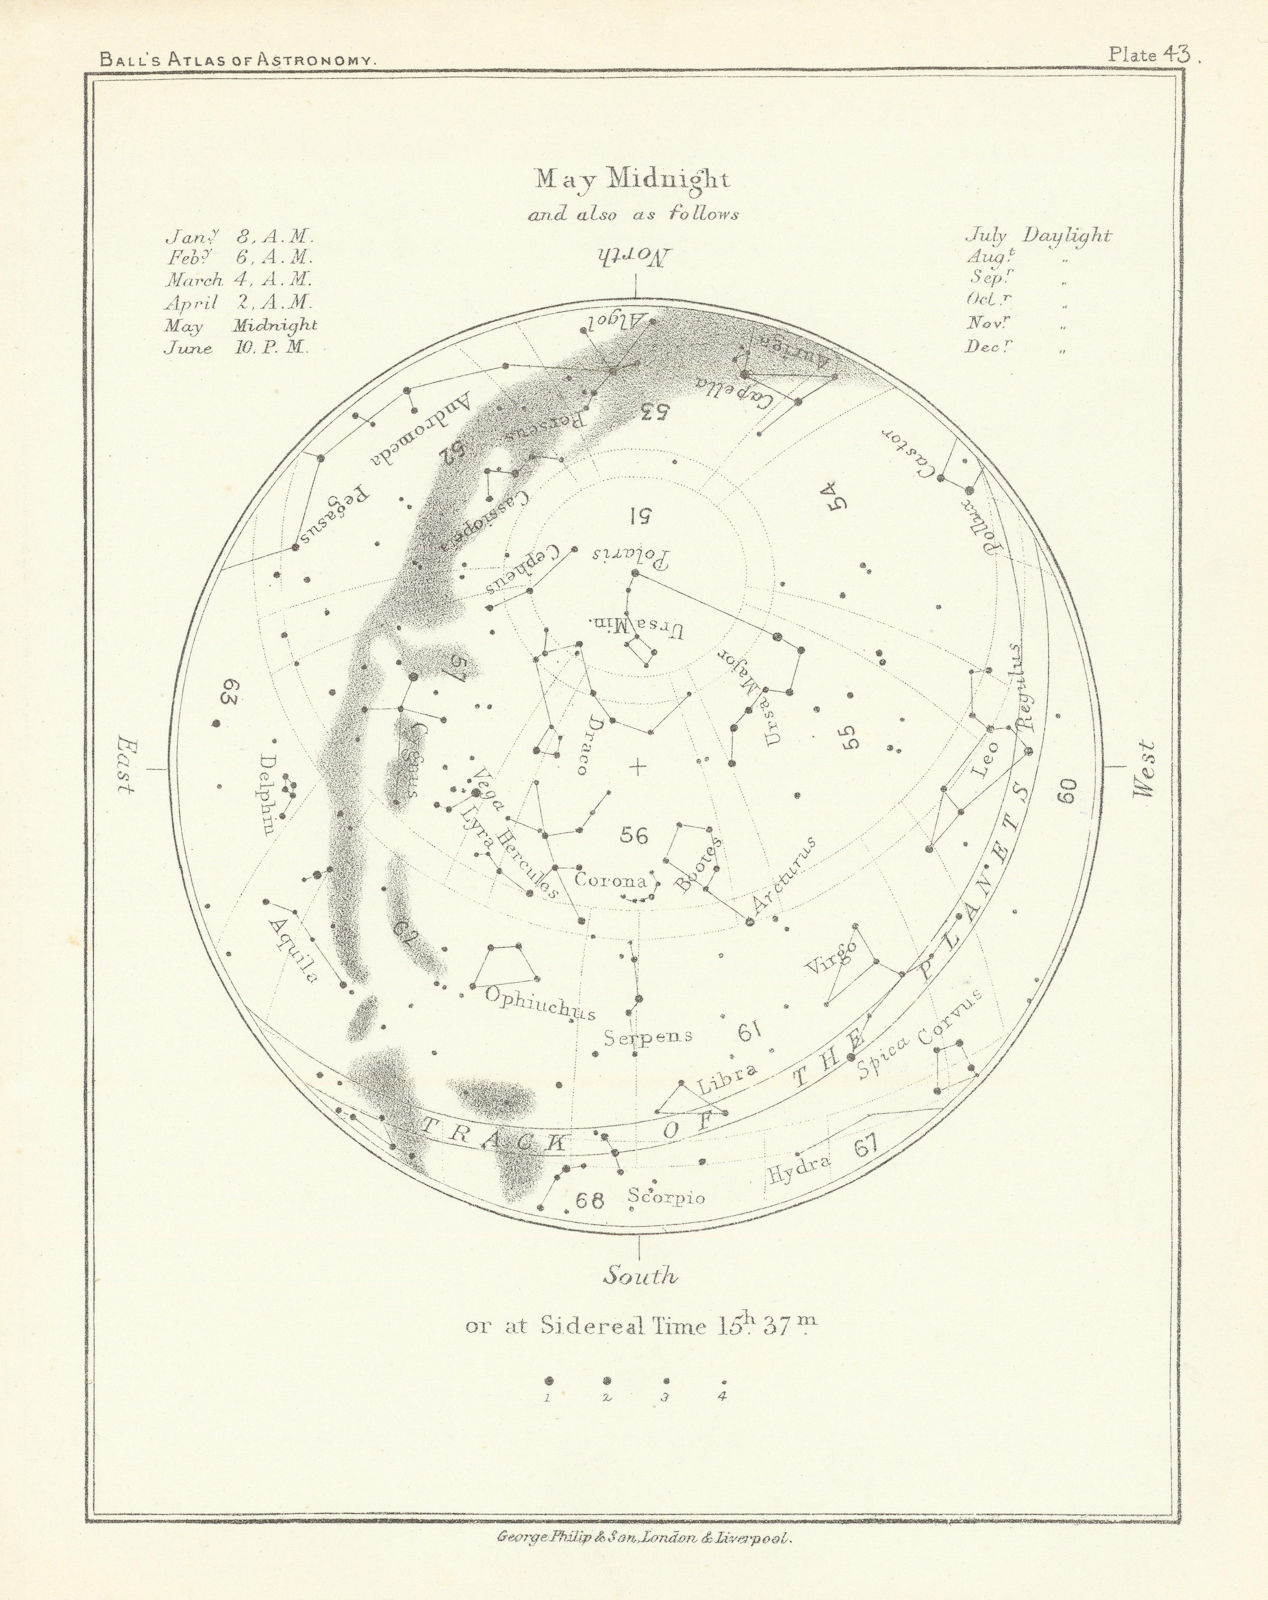 Night Sky Star Chart - May Midnight by Robert Ball. Astronomy 1892 old map